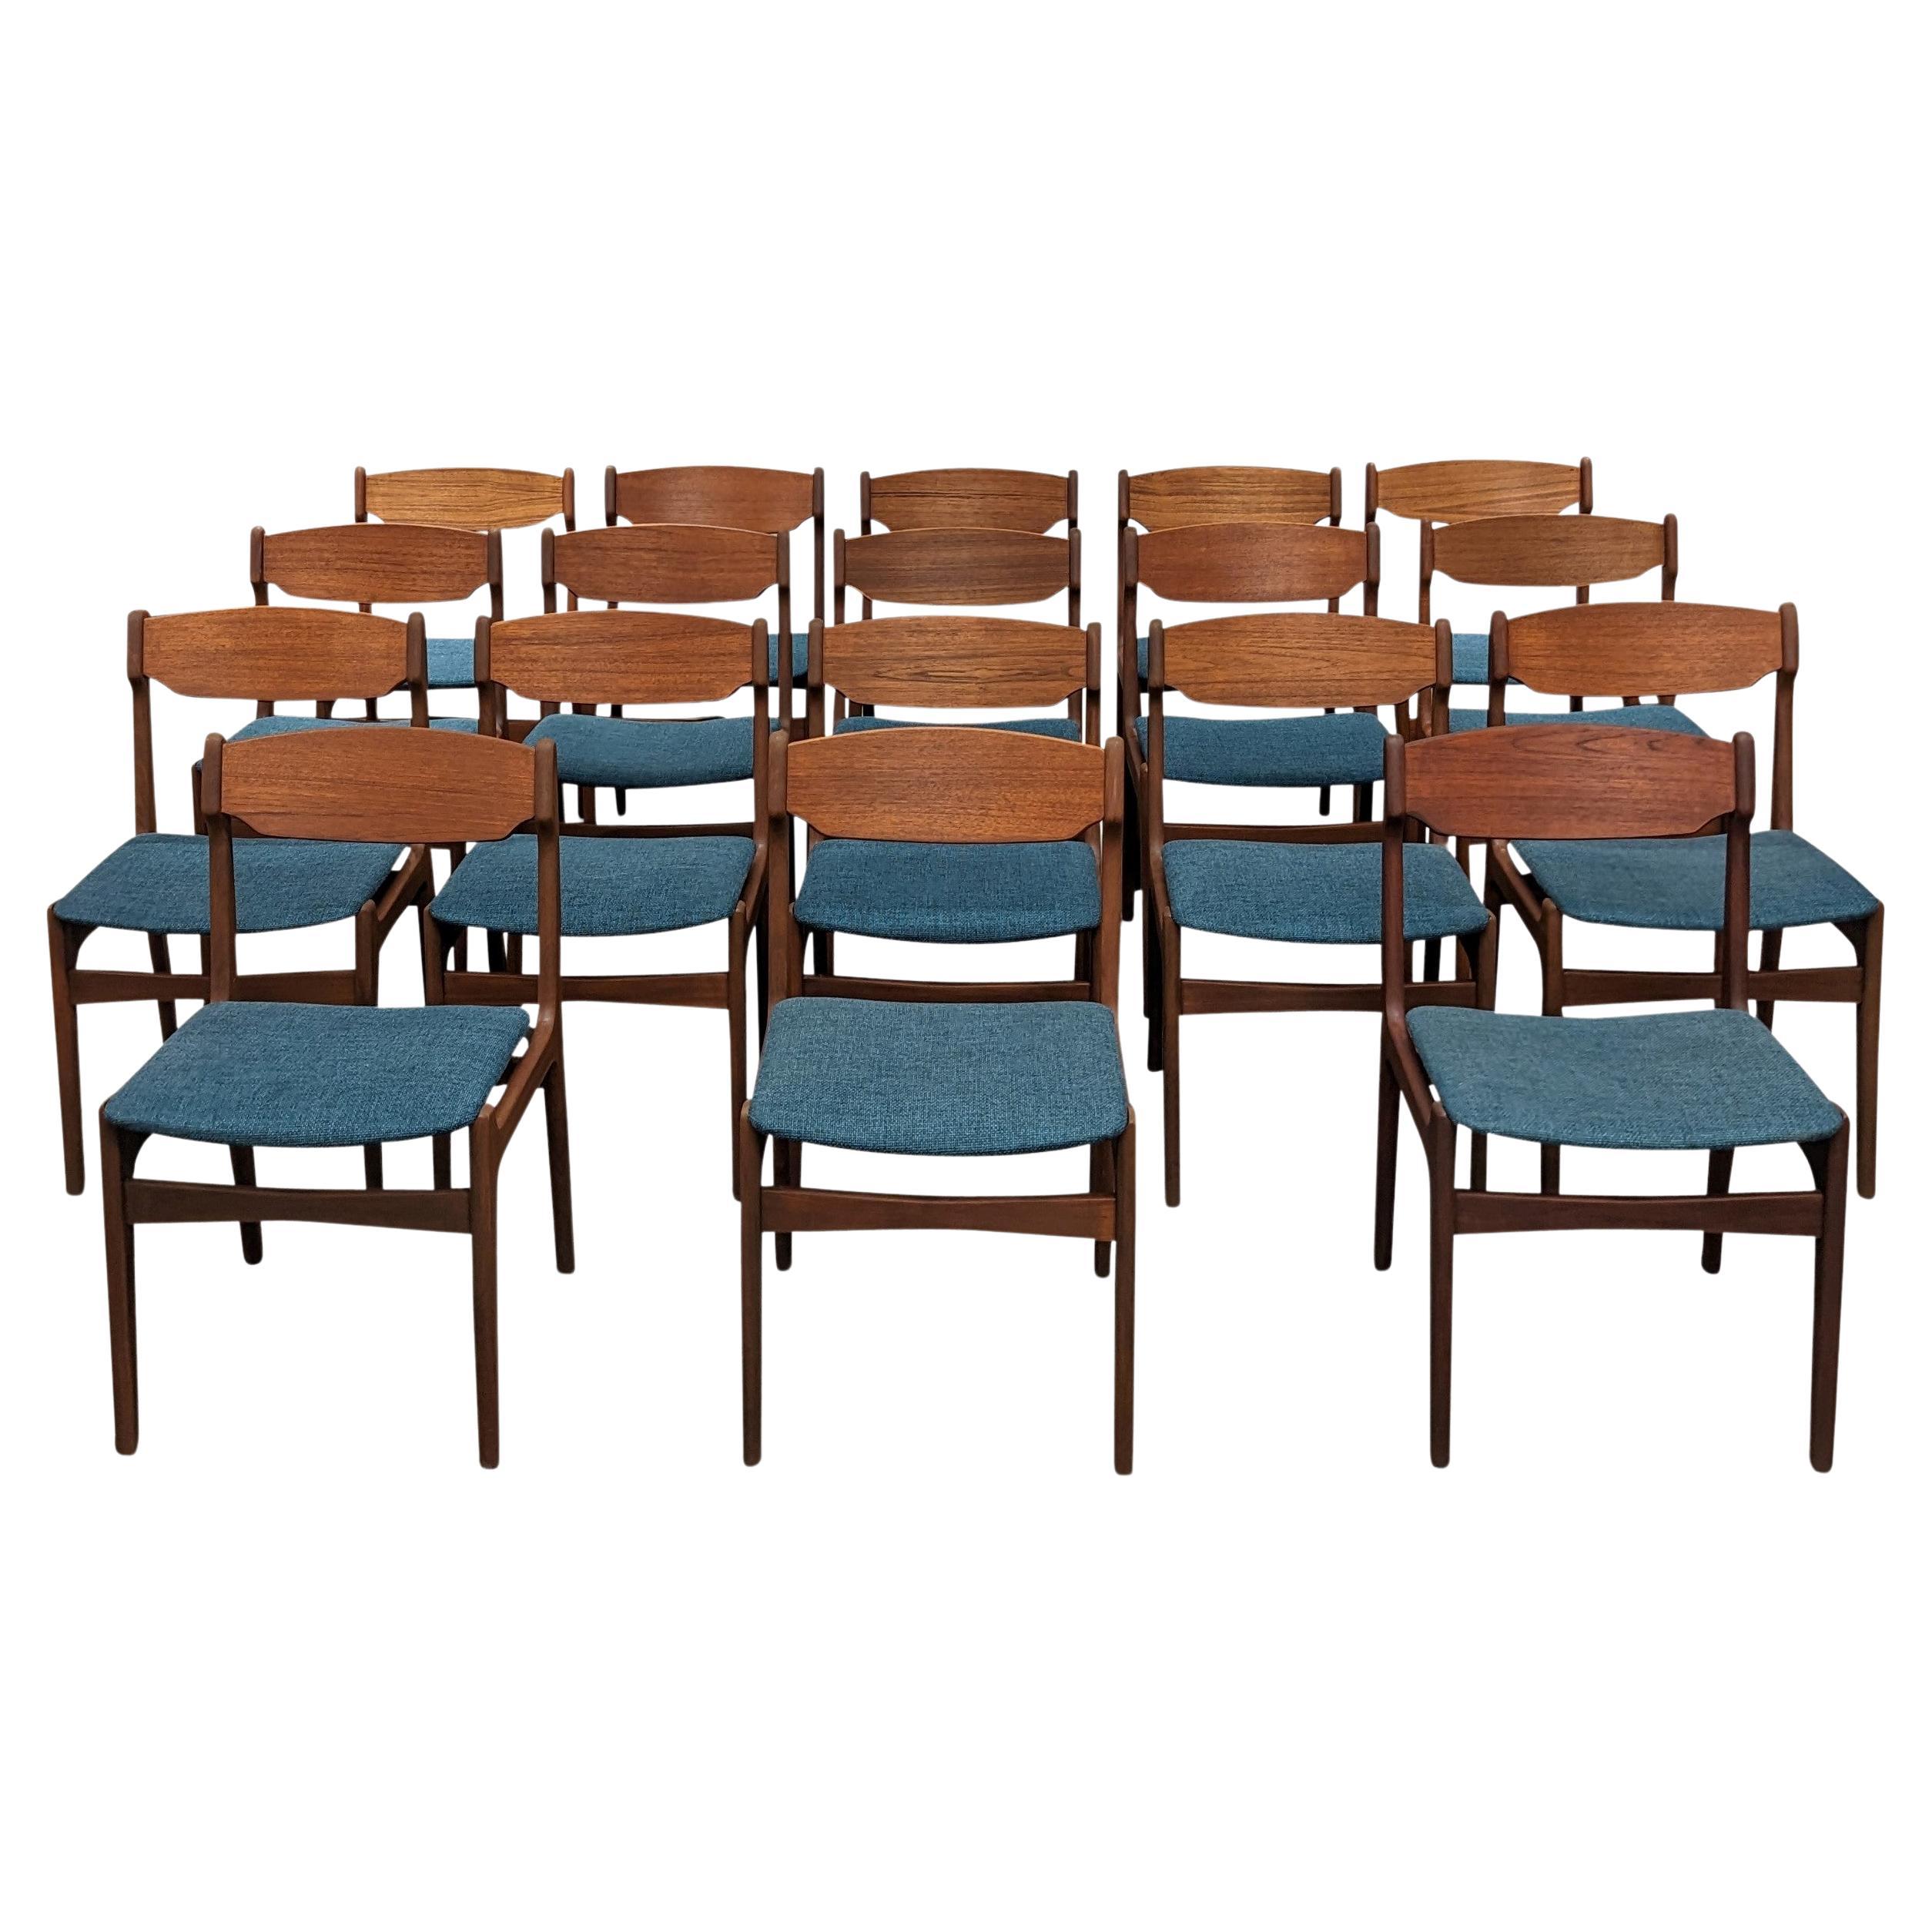 18 Teak Dining Chairs, 012360f Vintage Danish Midcentury For Sale at 1stDibs